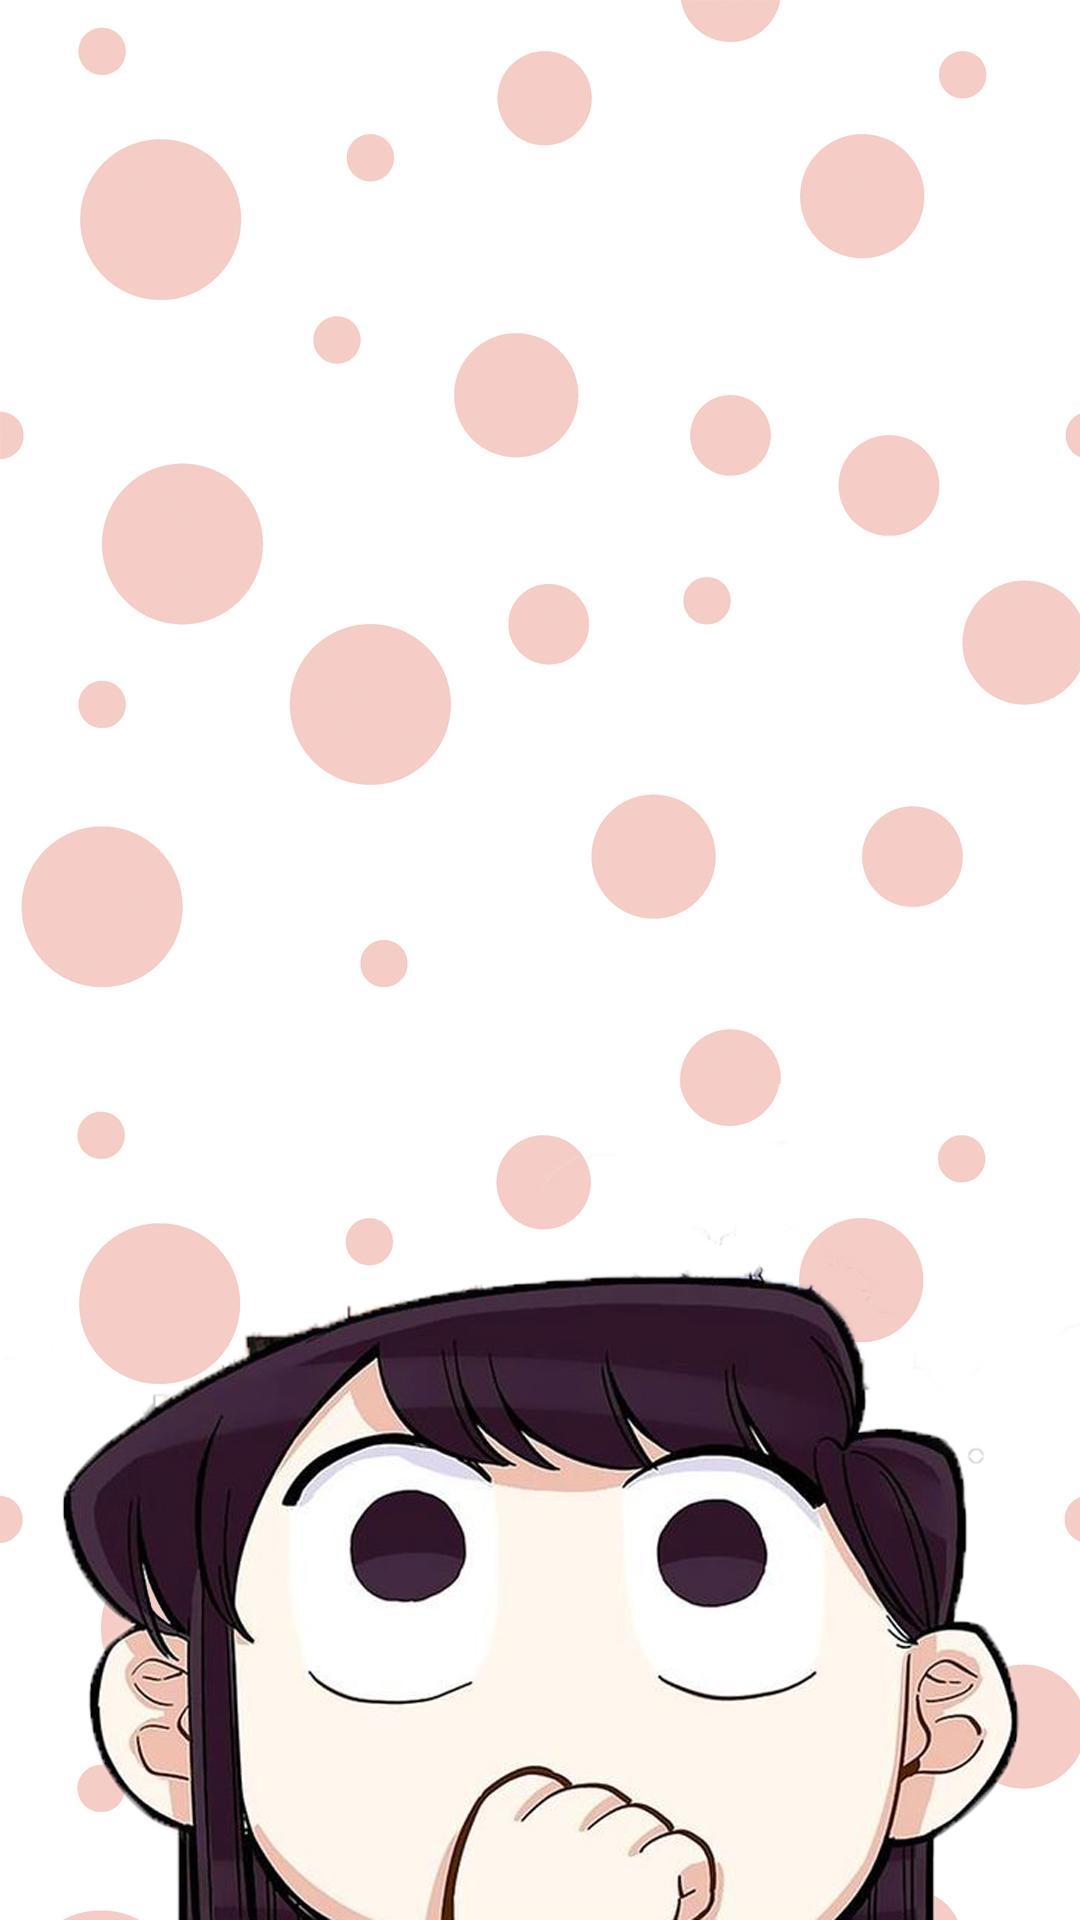 I Made A Komi San Wallpaper. Feel Free To Use It Or Clean It Up A